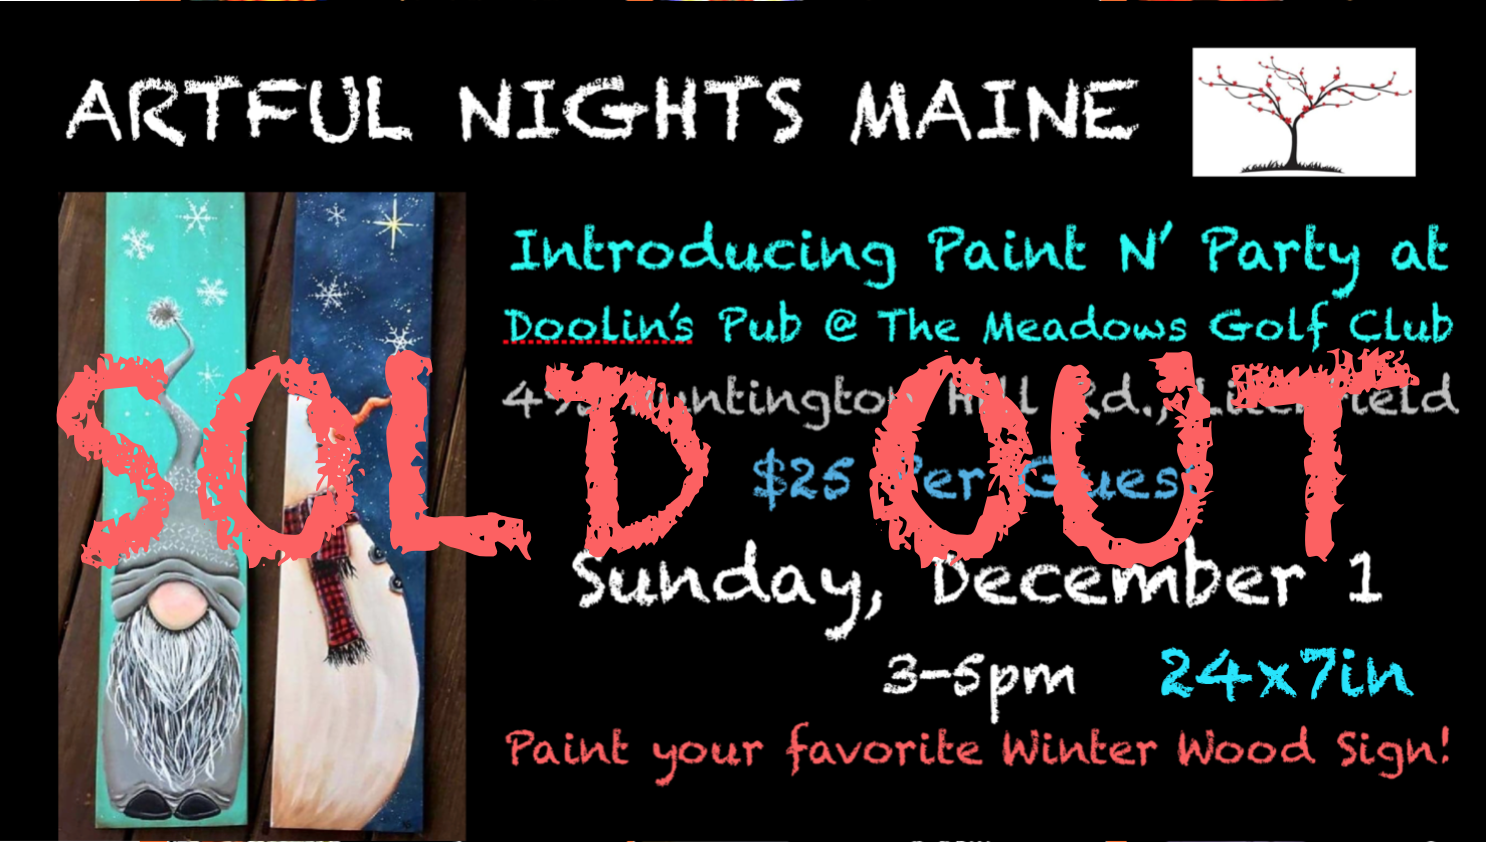 Introducing Paint N' Party at Doolin's Pub at The Meadows Golf Club